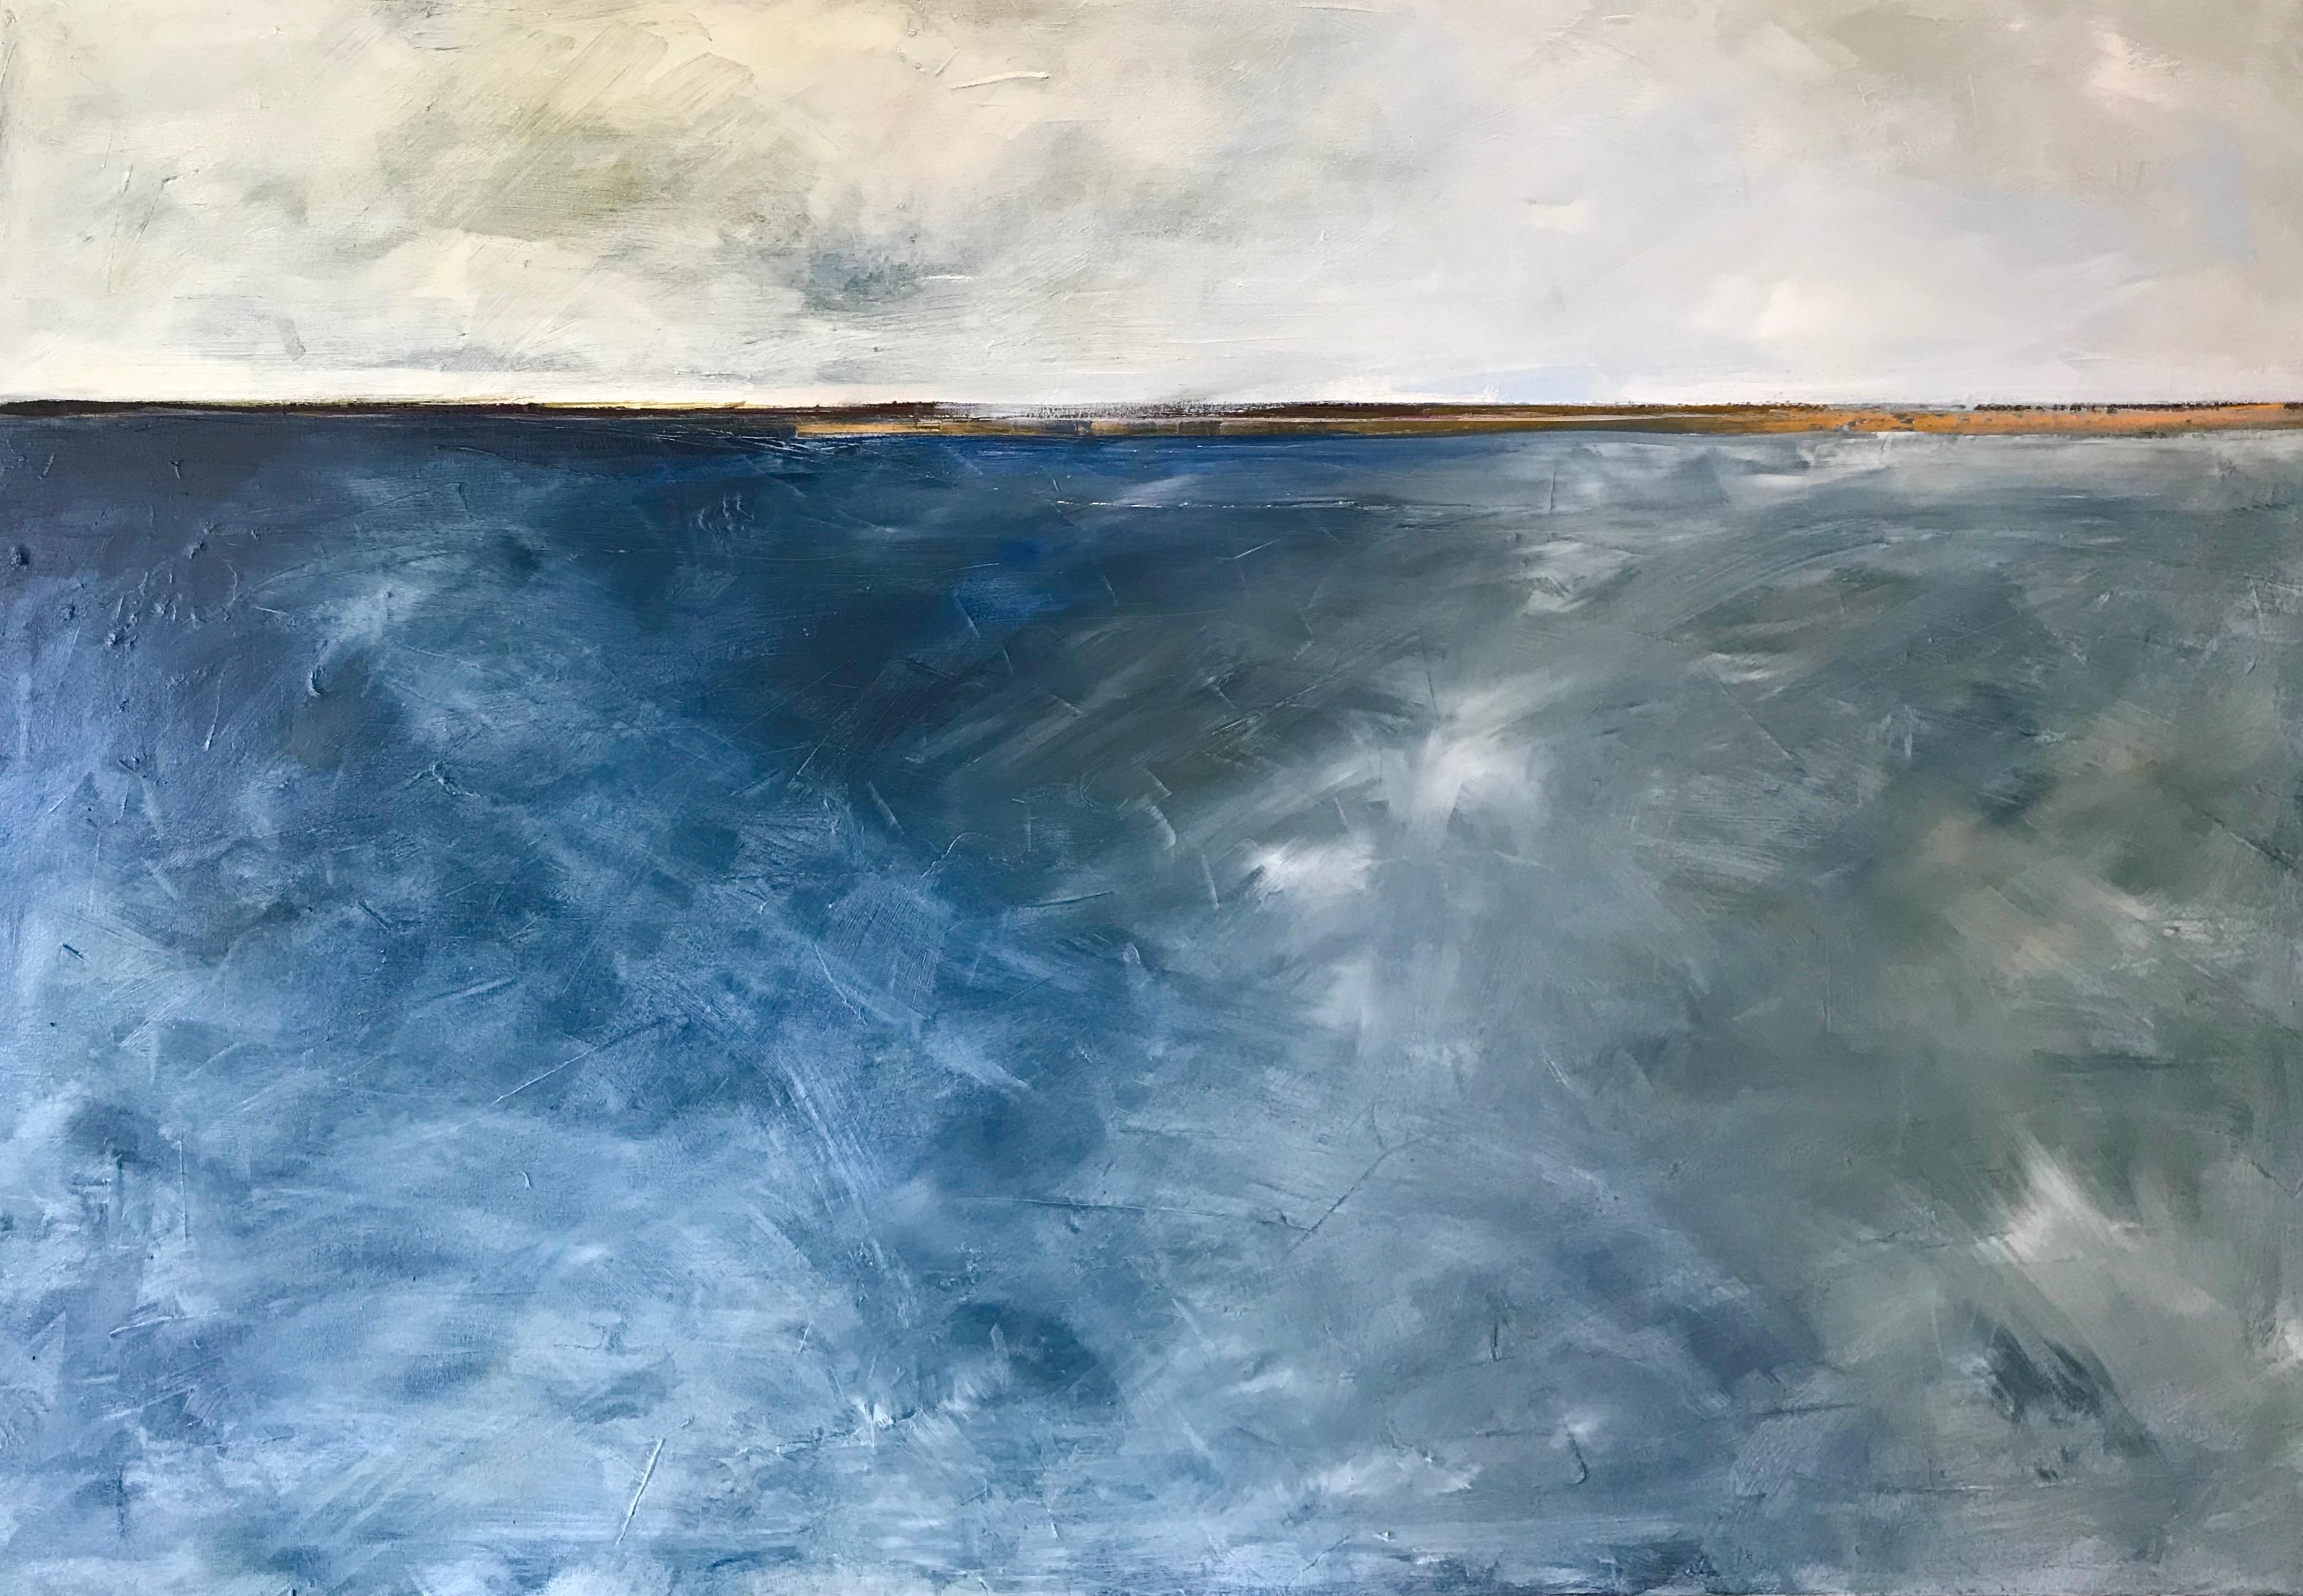 Dale Najarian Abstract Painting - In Too Deep, Abstracted Landscape, Oil on Linen, Blue, White, Gray, Seascape